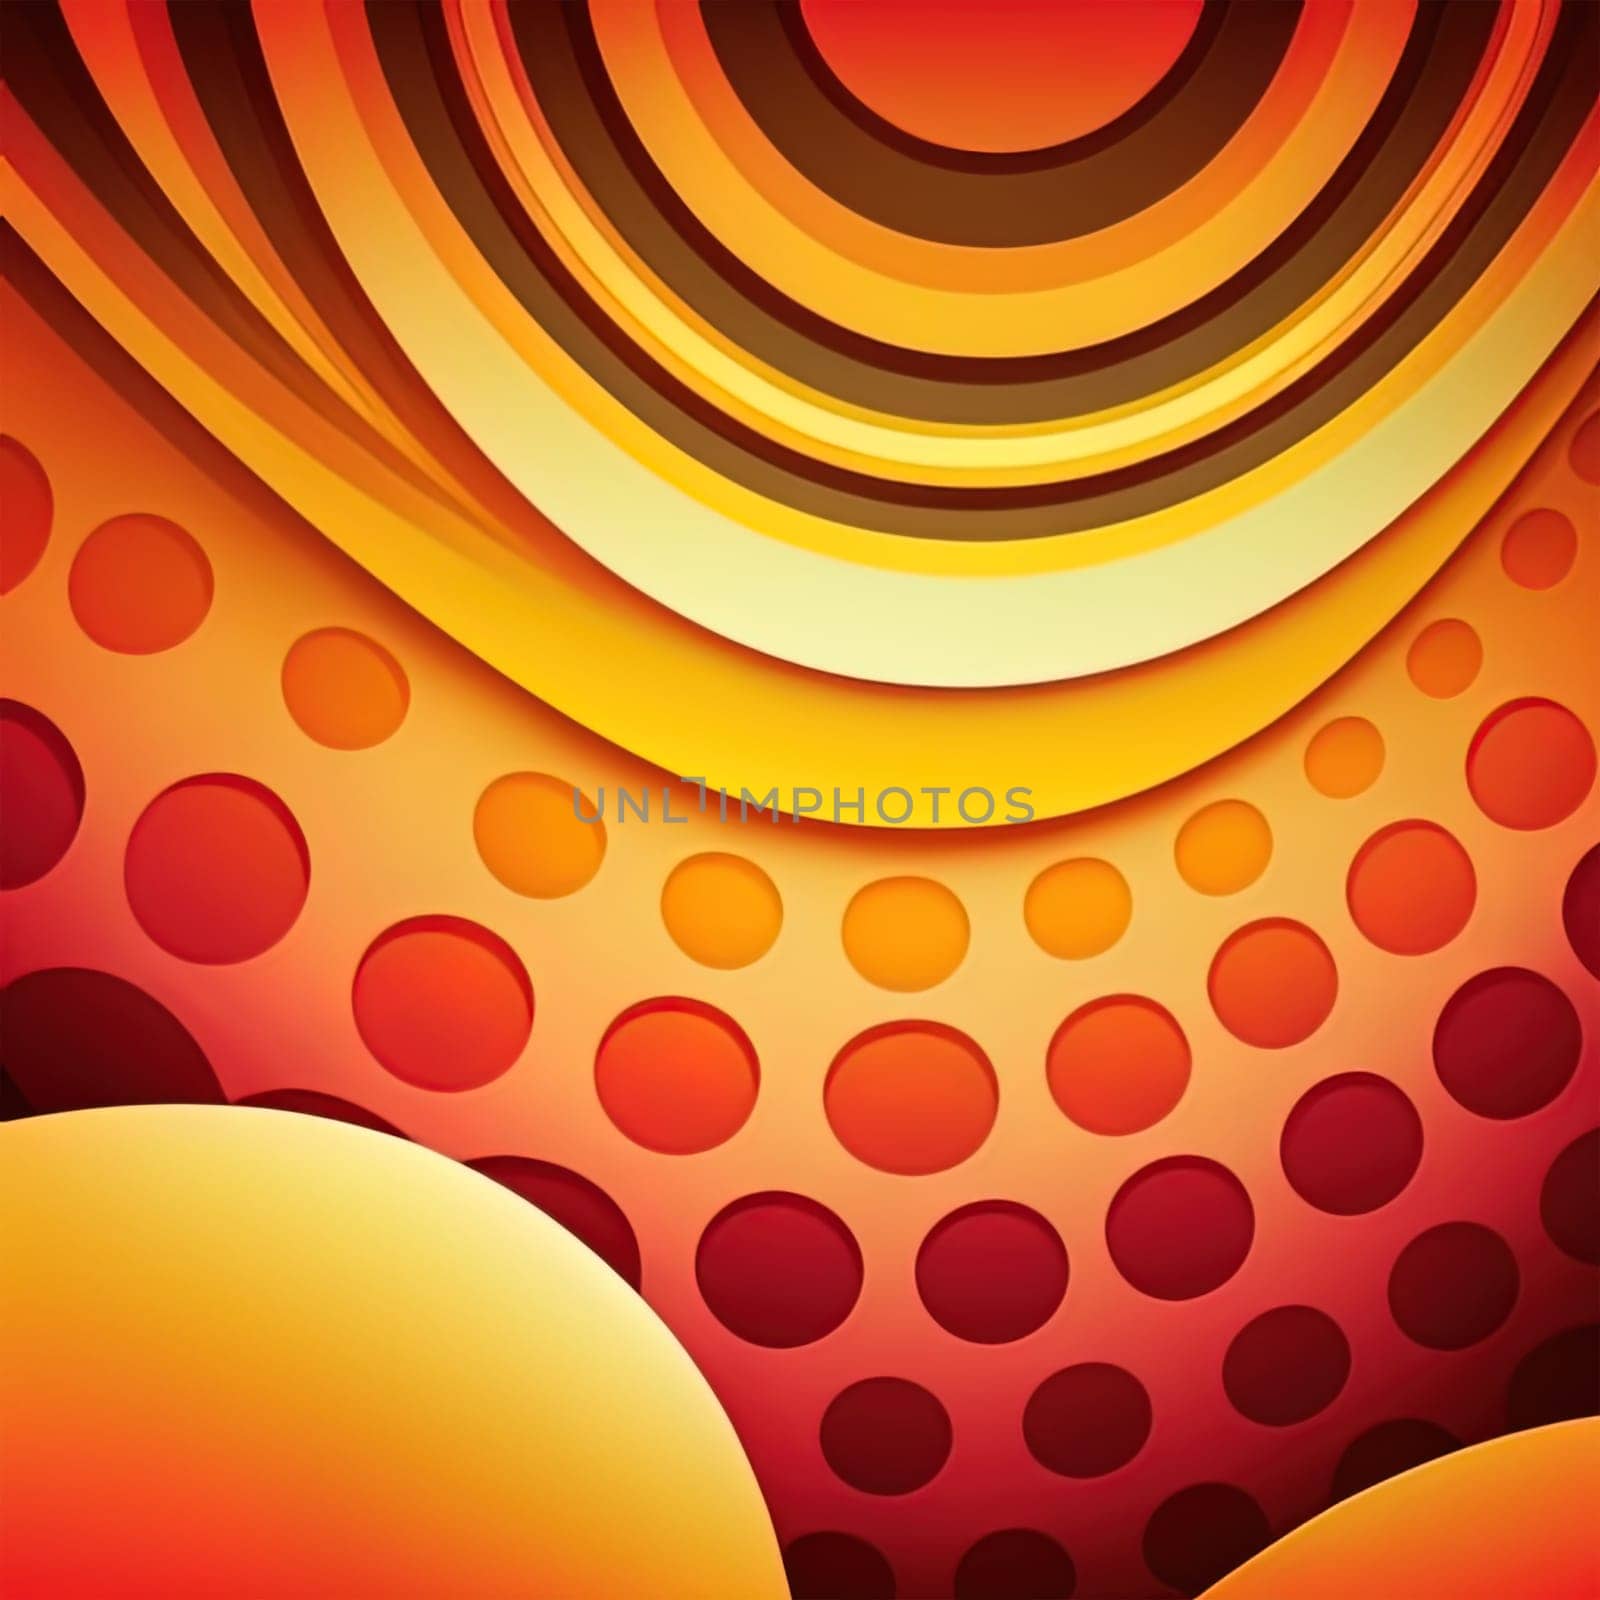 Retro groovy Gradient striped background by Dustick